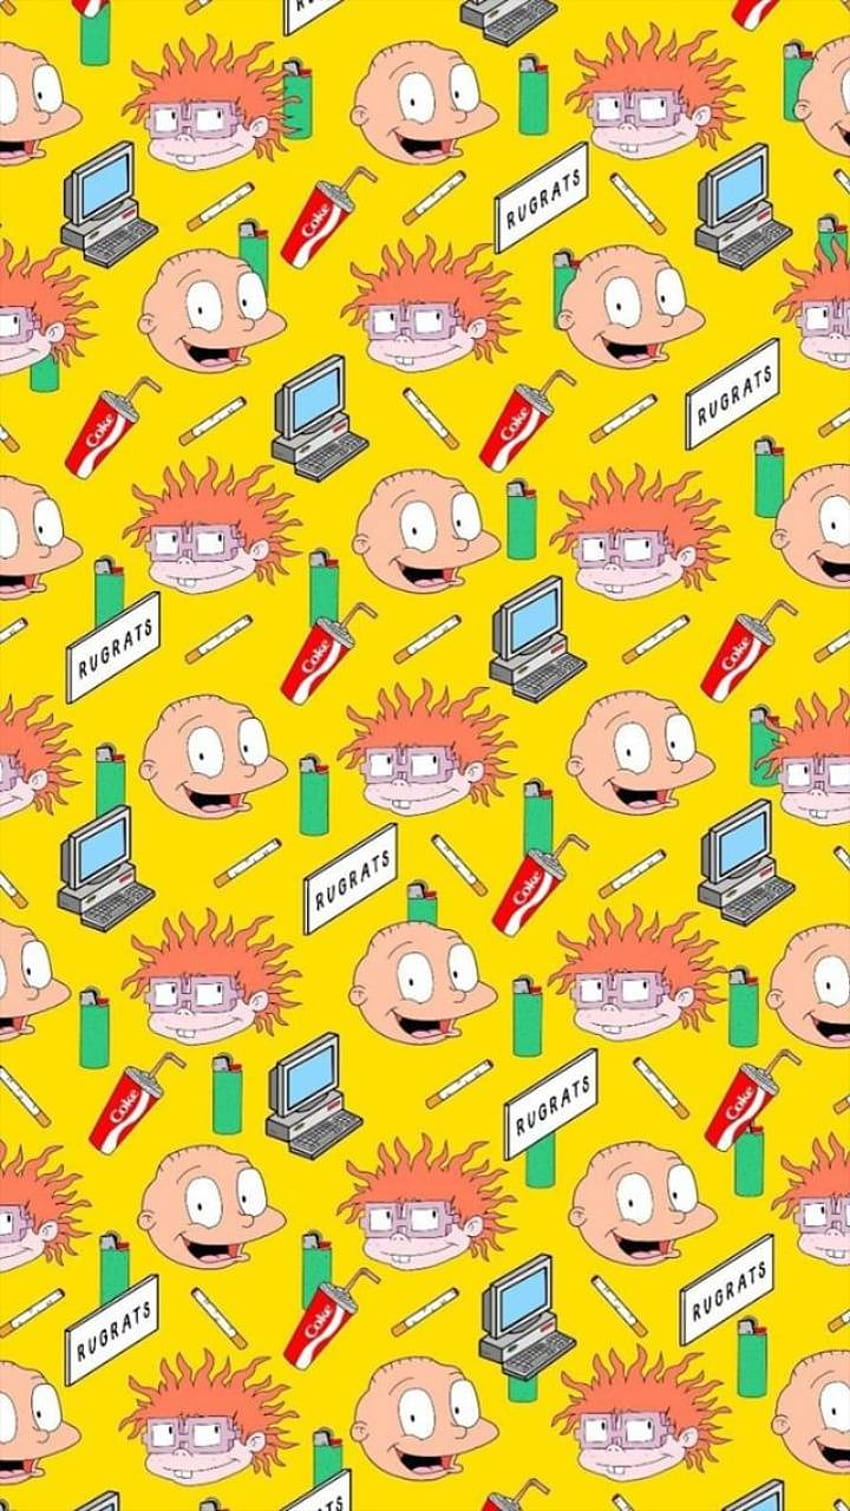 Rugrats posted by John Sellers, rugrats aesthetic HD phone wallpaper